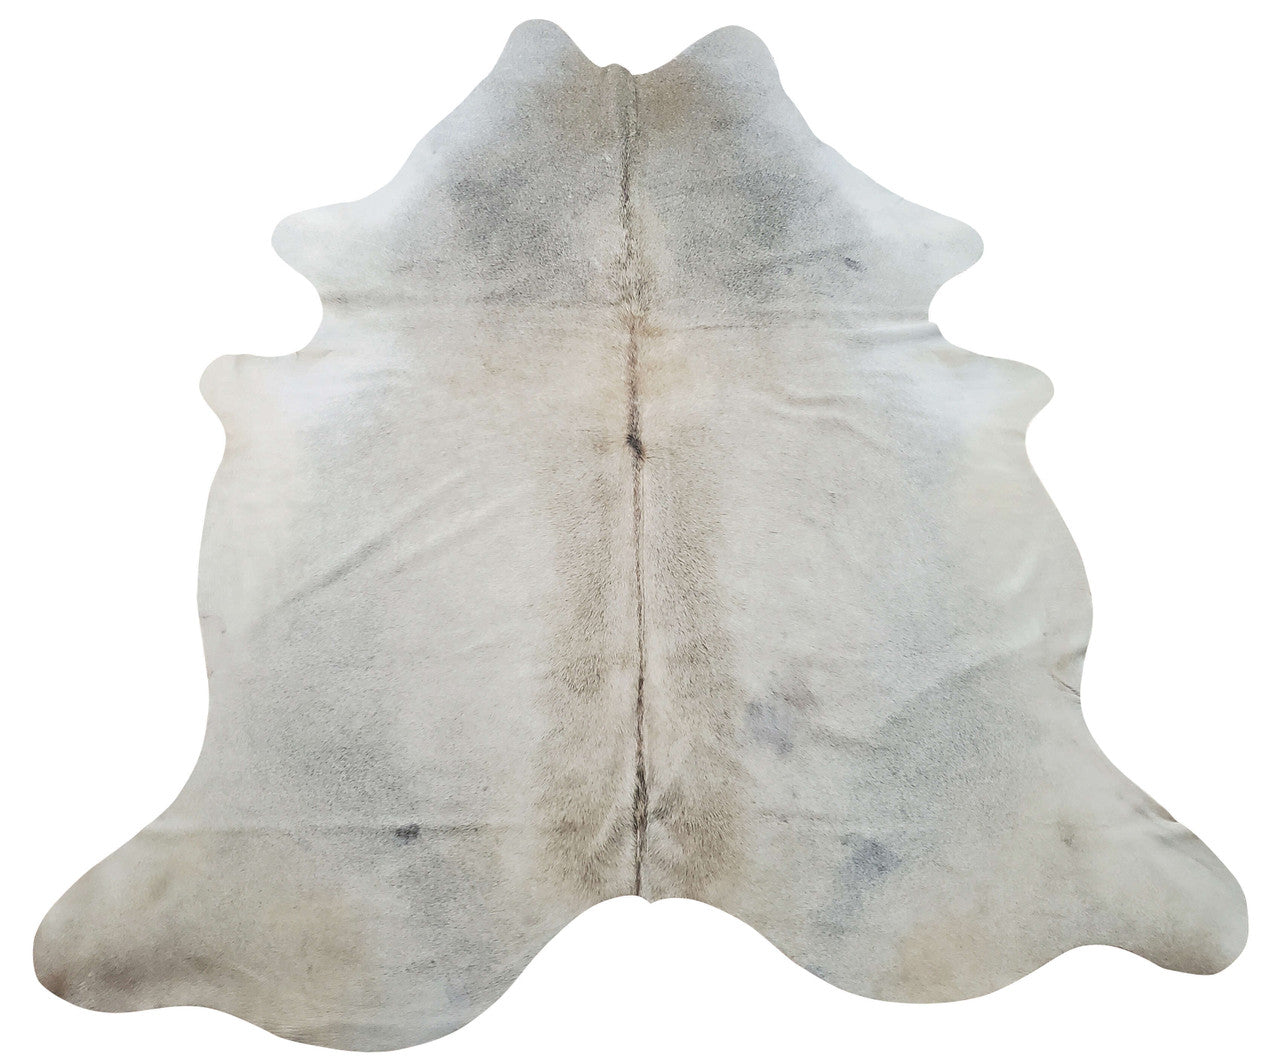 These western cow skin rugs are hundred percent ethical and in no way, there is any harm done to any animal, all these cow rugs are inspected by Customs and PETA. 